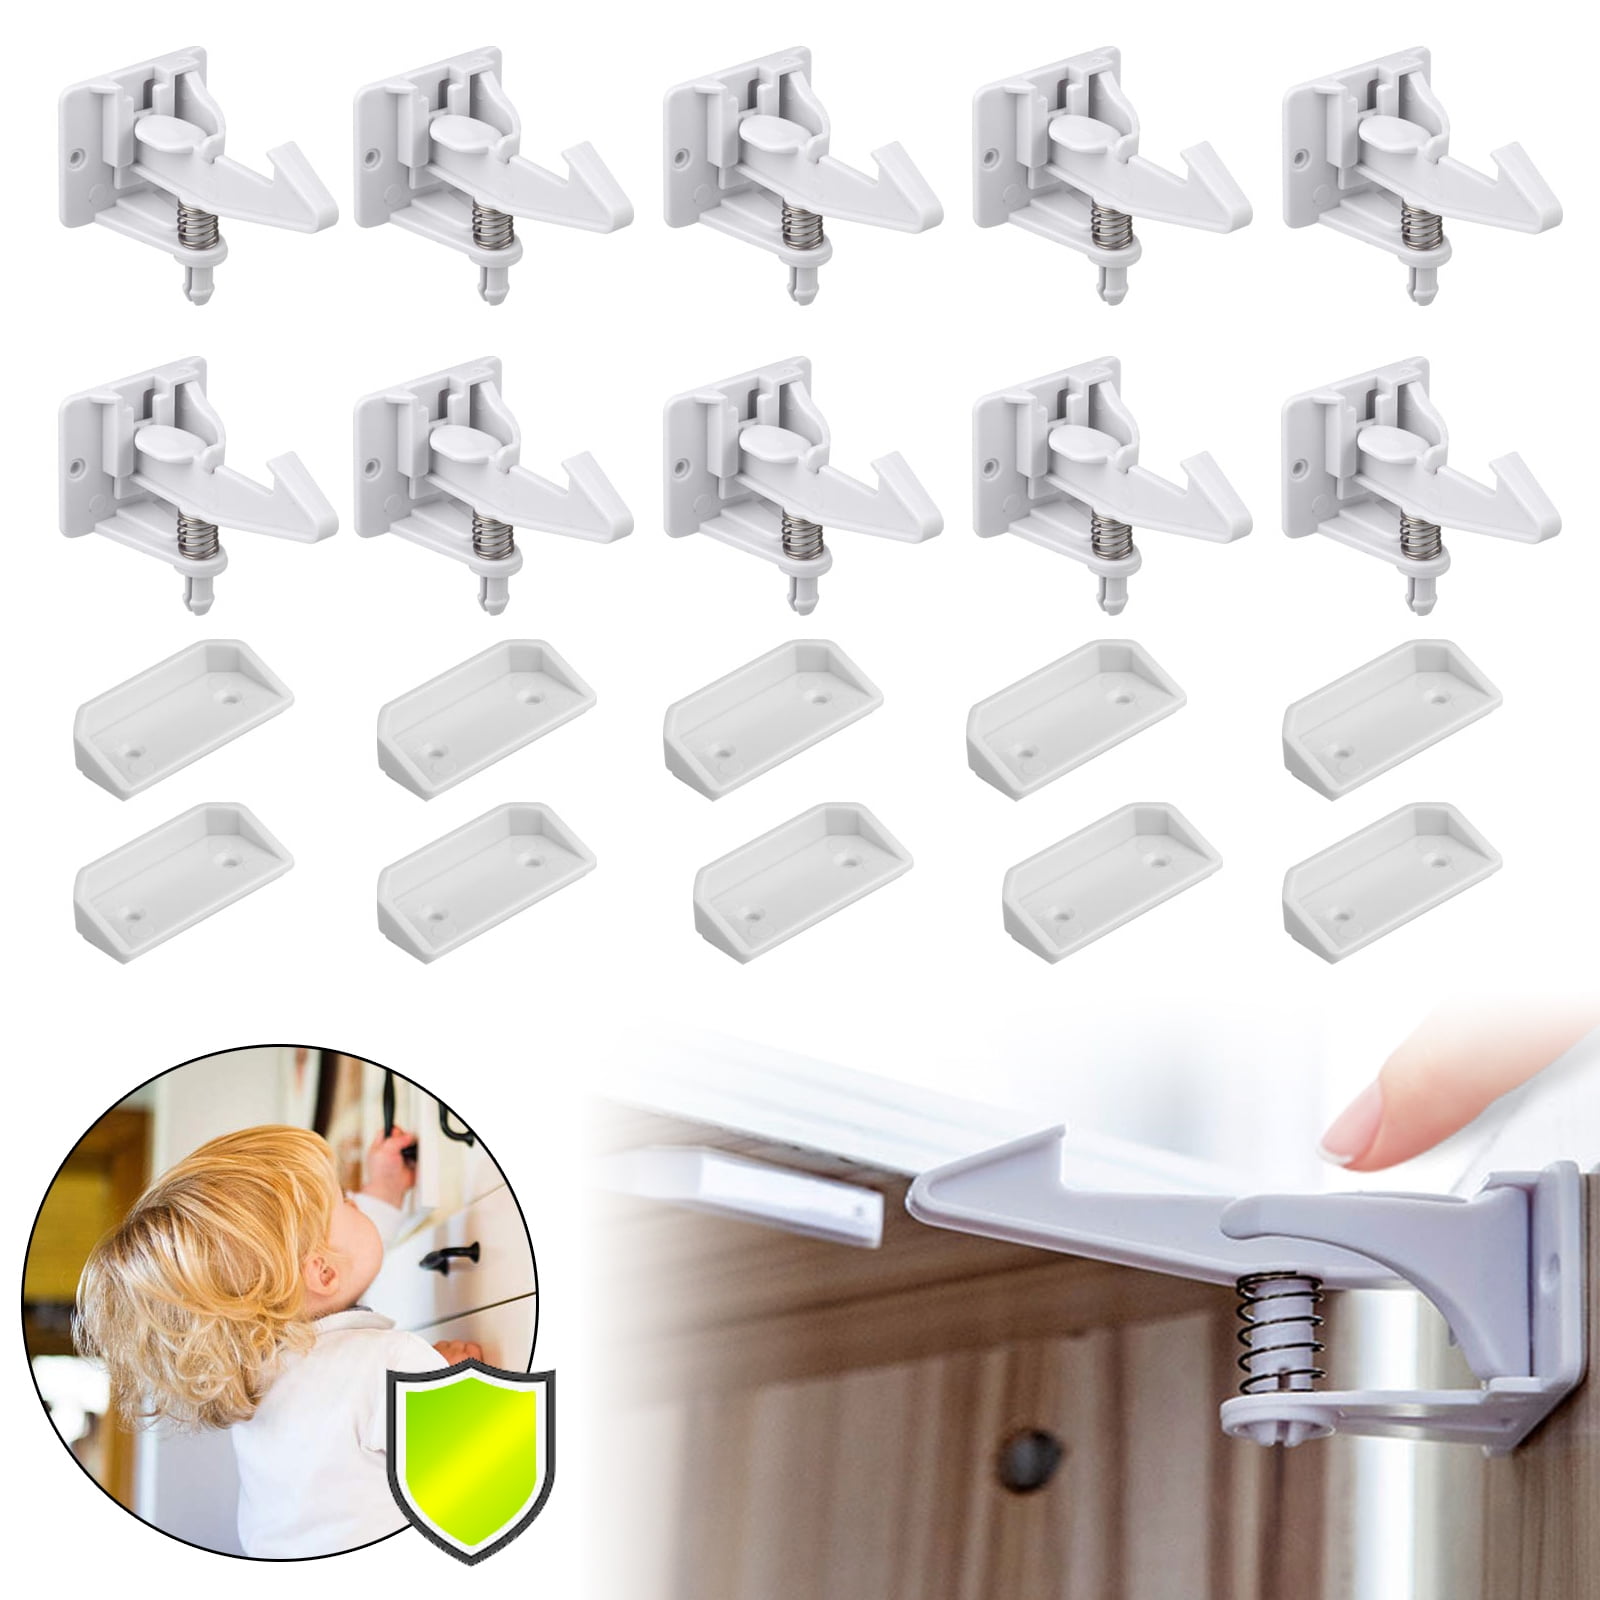 16 Pack Child Safety Magnetic Cabinet Locks - Vmaisi Children Proof Cupboard Baby Locks Latches - Adhesive for Cabinets & Drawers and Screws Fixed